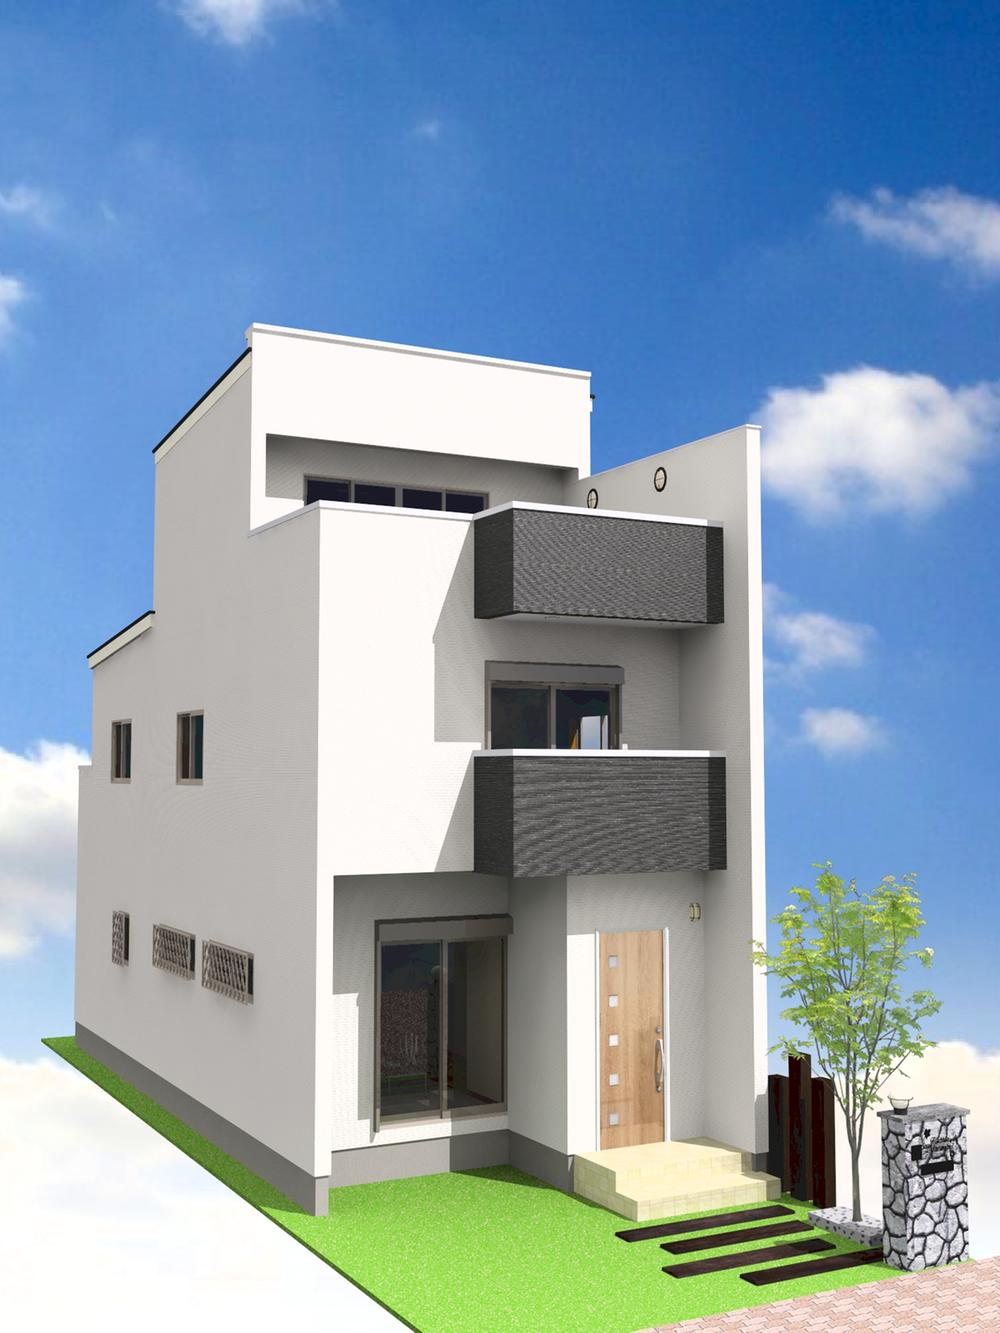 Rendering (appearance). Model house complete image